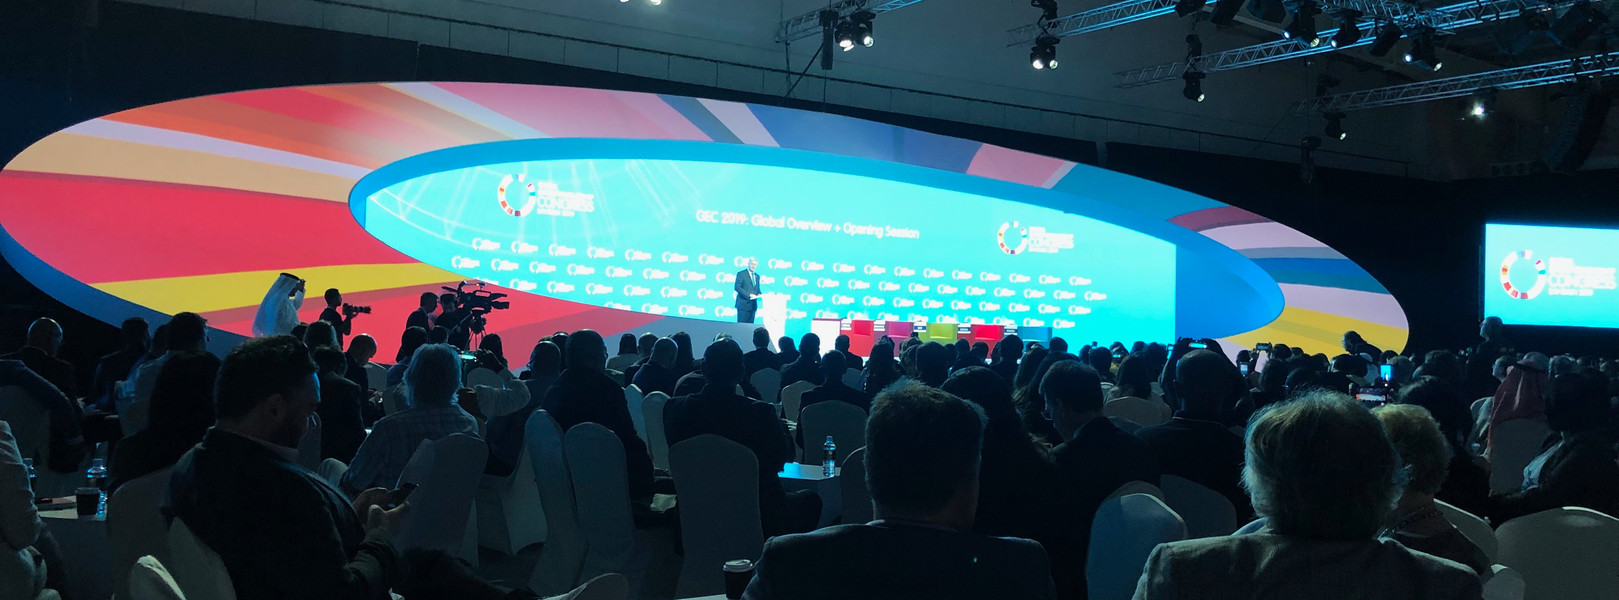 Global Entrepreneurship Congress 2019: Ecosystems are unique, with shared challenges and opportunities